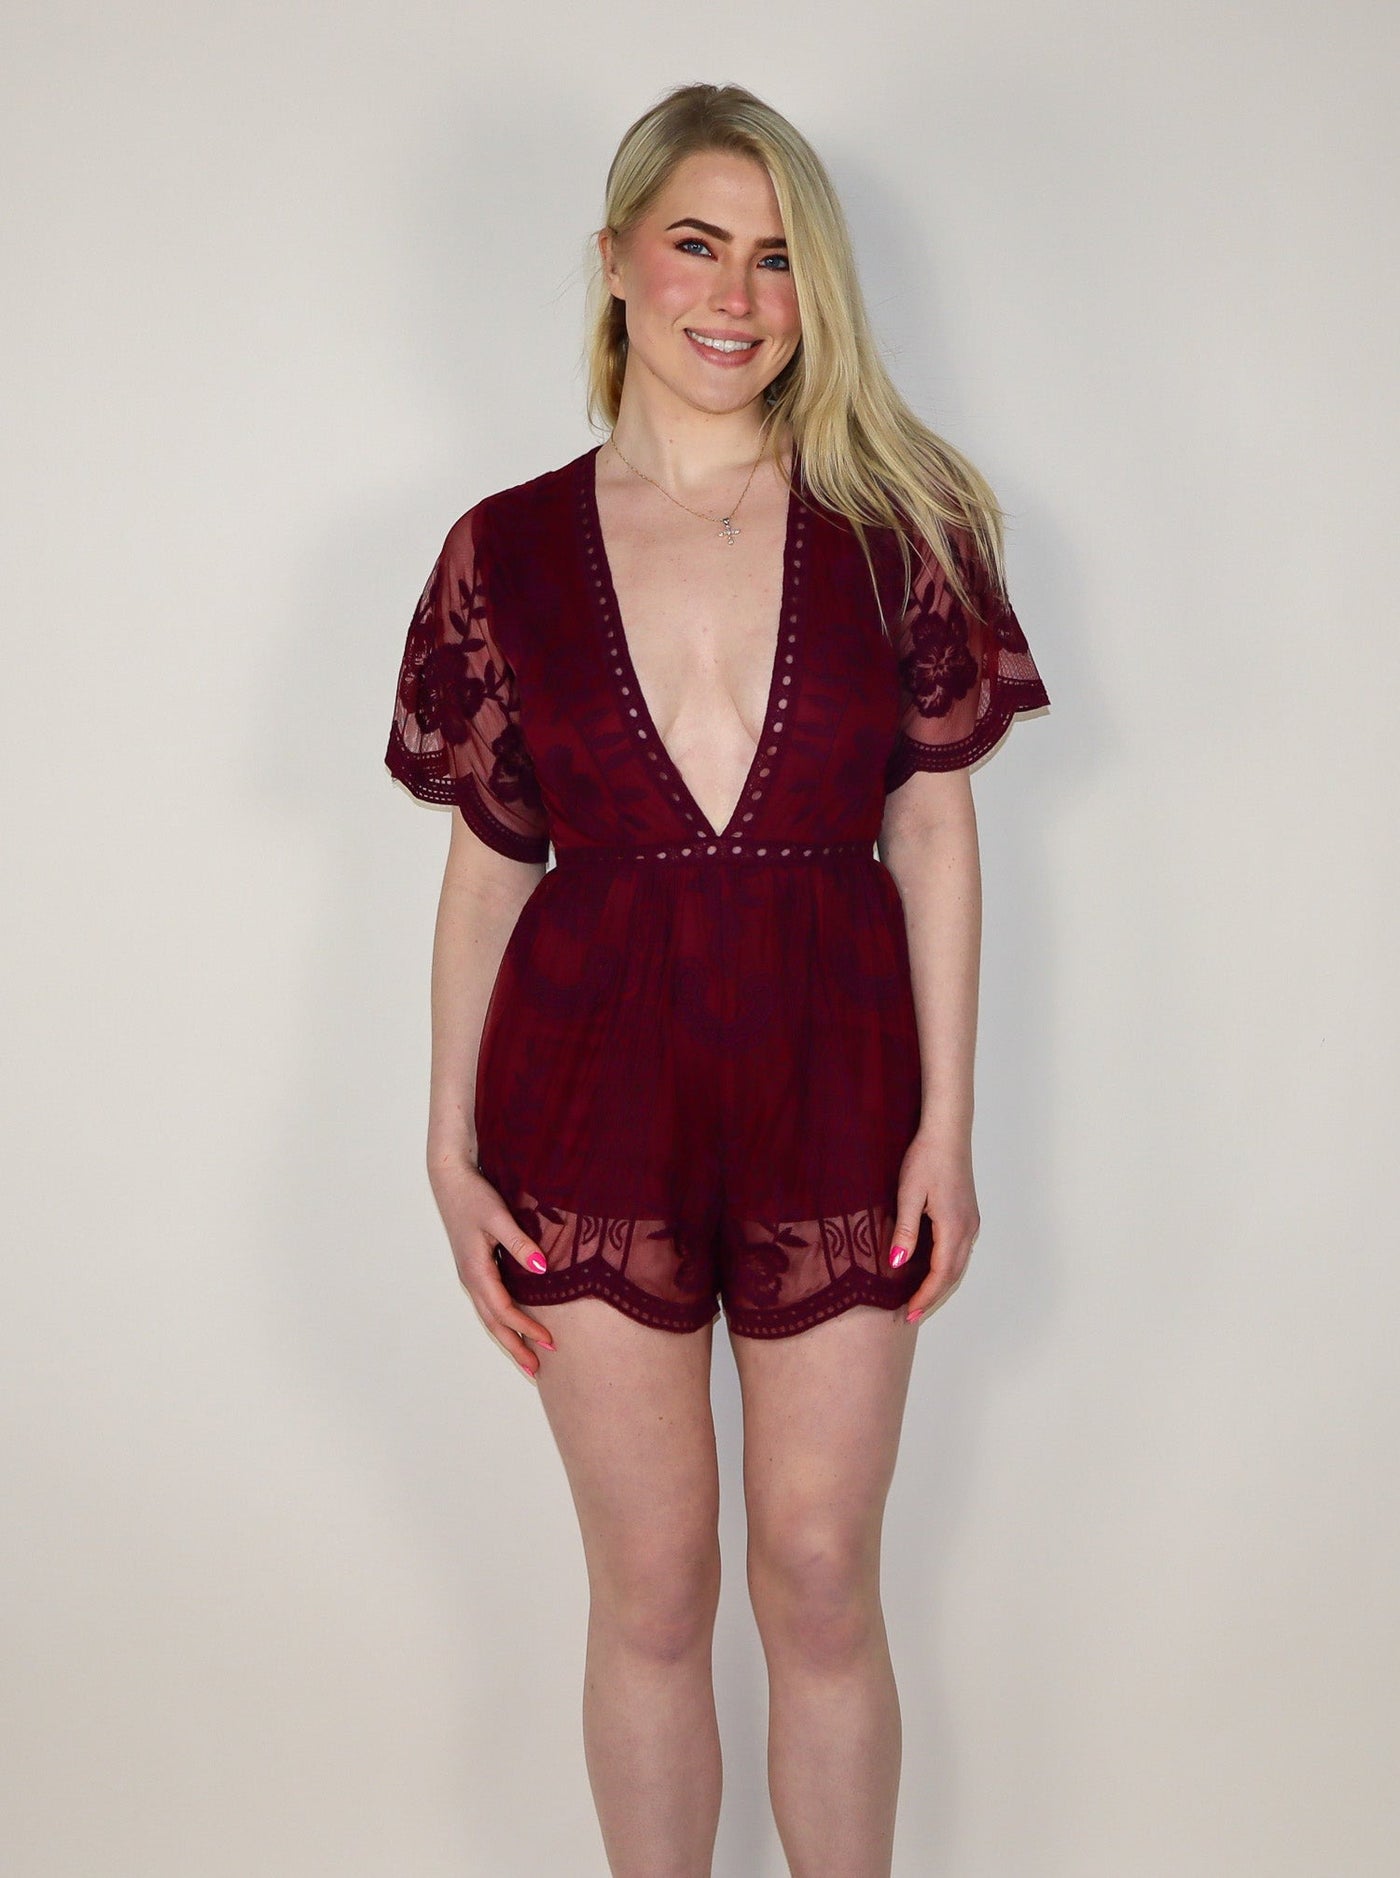 Model is wearing a maroon lace romper with a plunging neckline. 